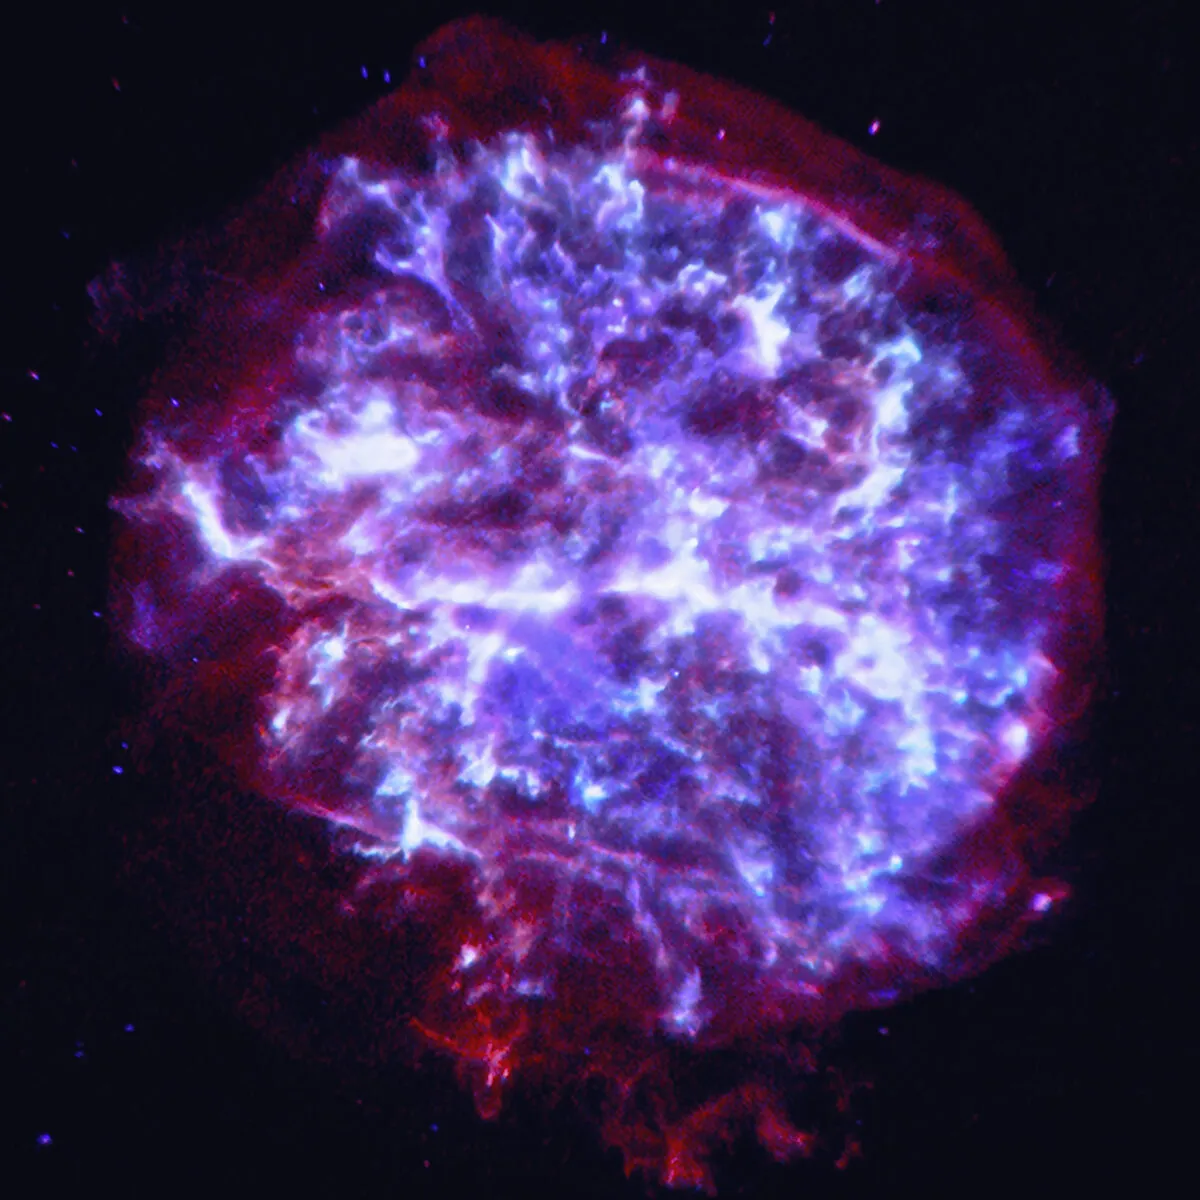 G292.0 1.8 When stars explode as a supernova, they leave behind objects known as supernova remnants. This one is a rare type that contains large amounts of oxygen. Credit: NASA/CXC/University of Texas/J. Bhalerao et al.